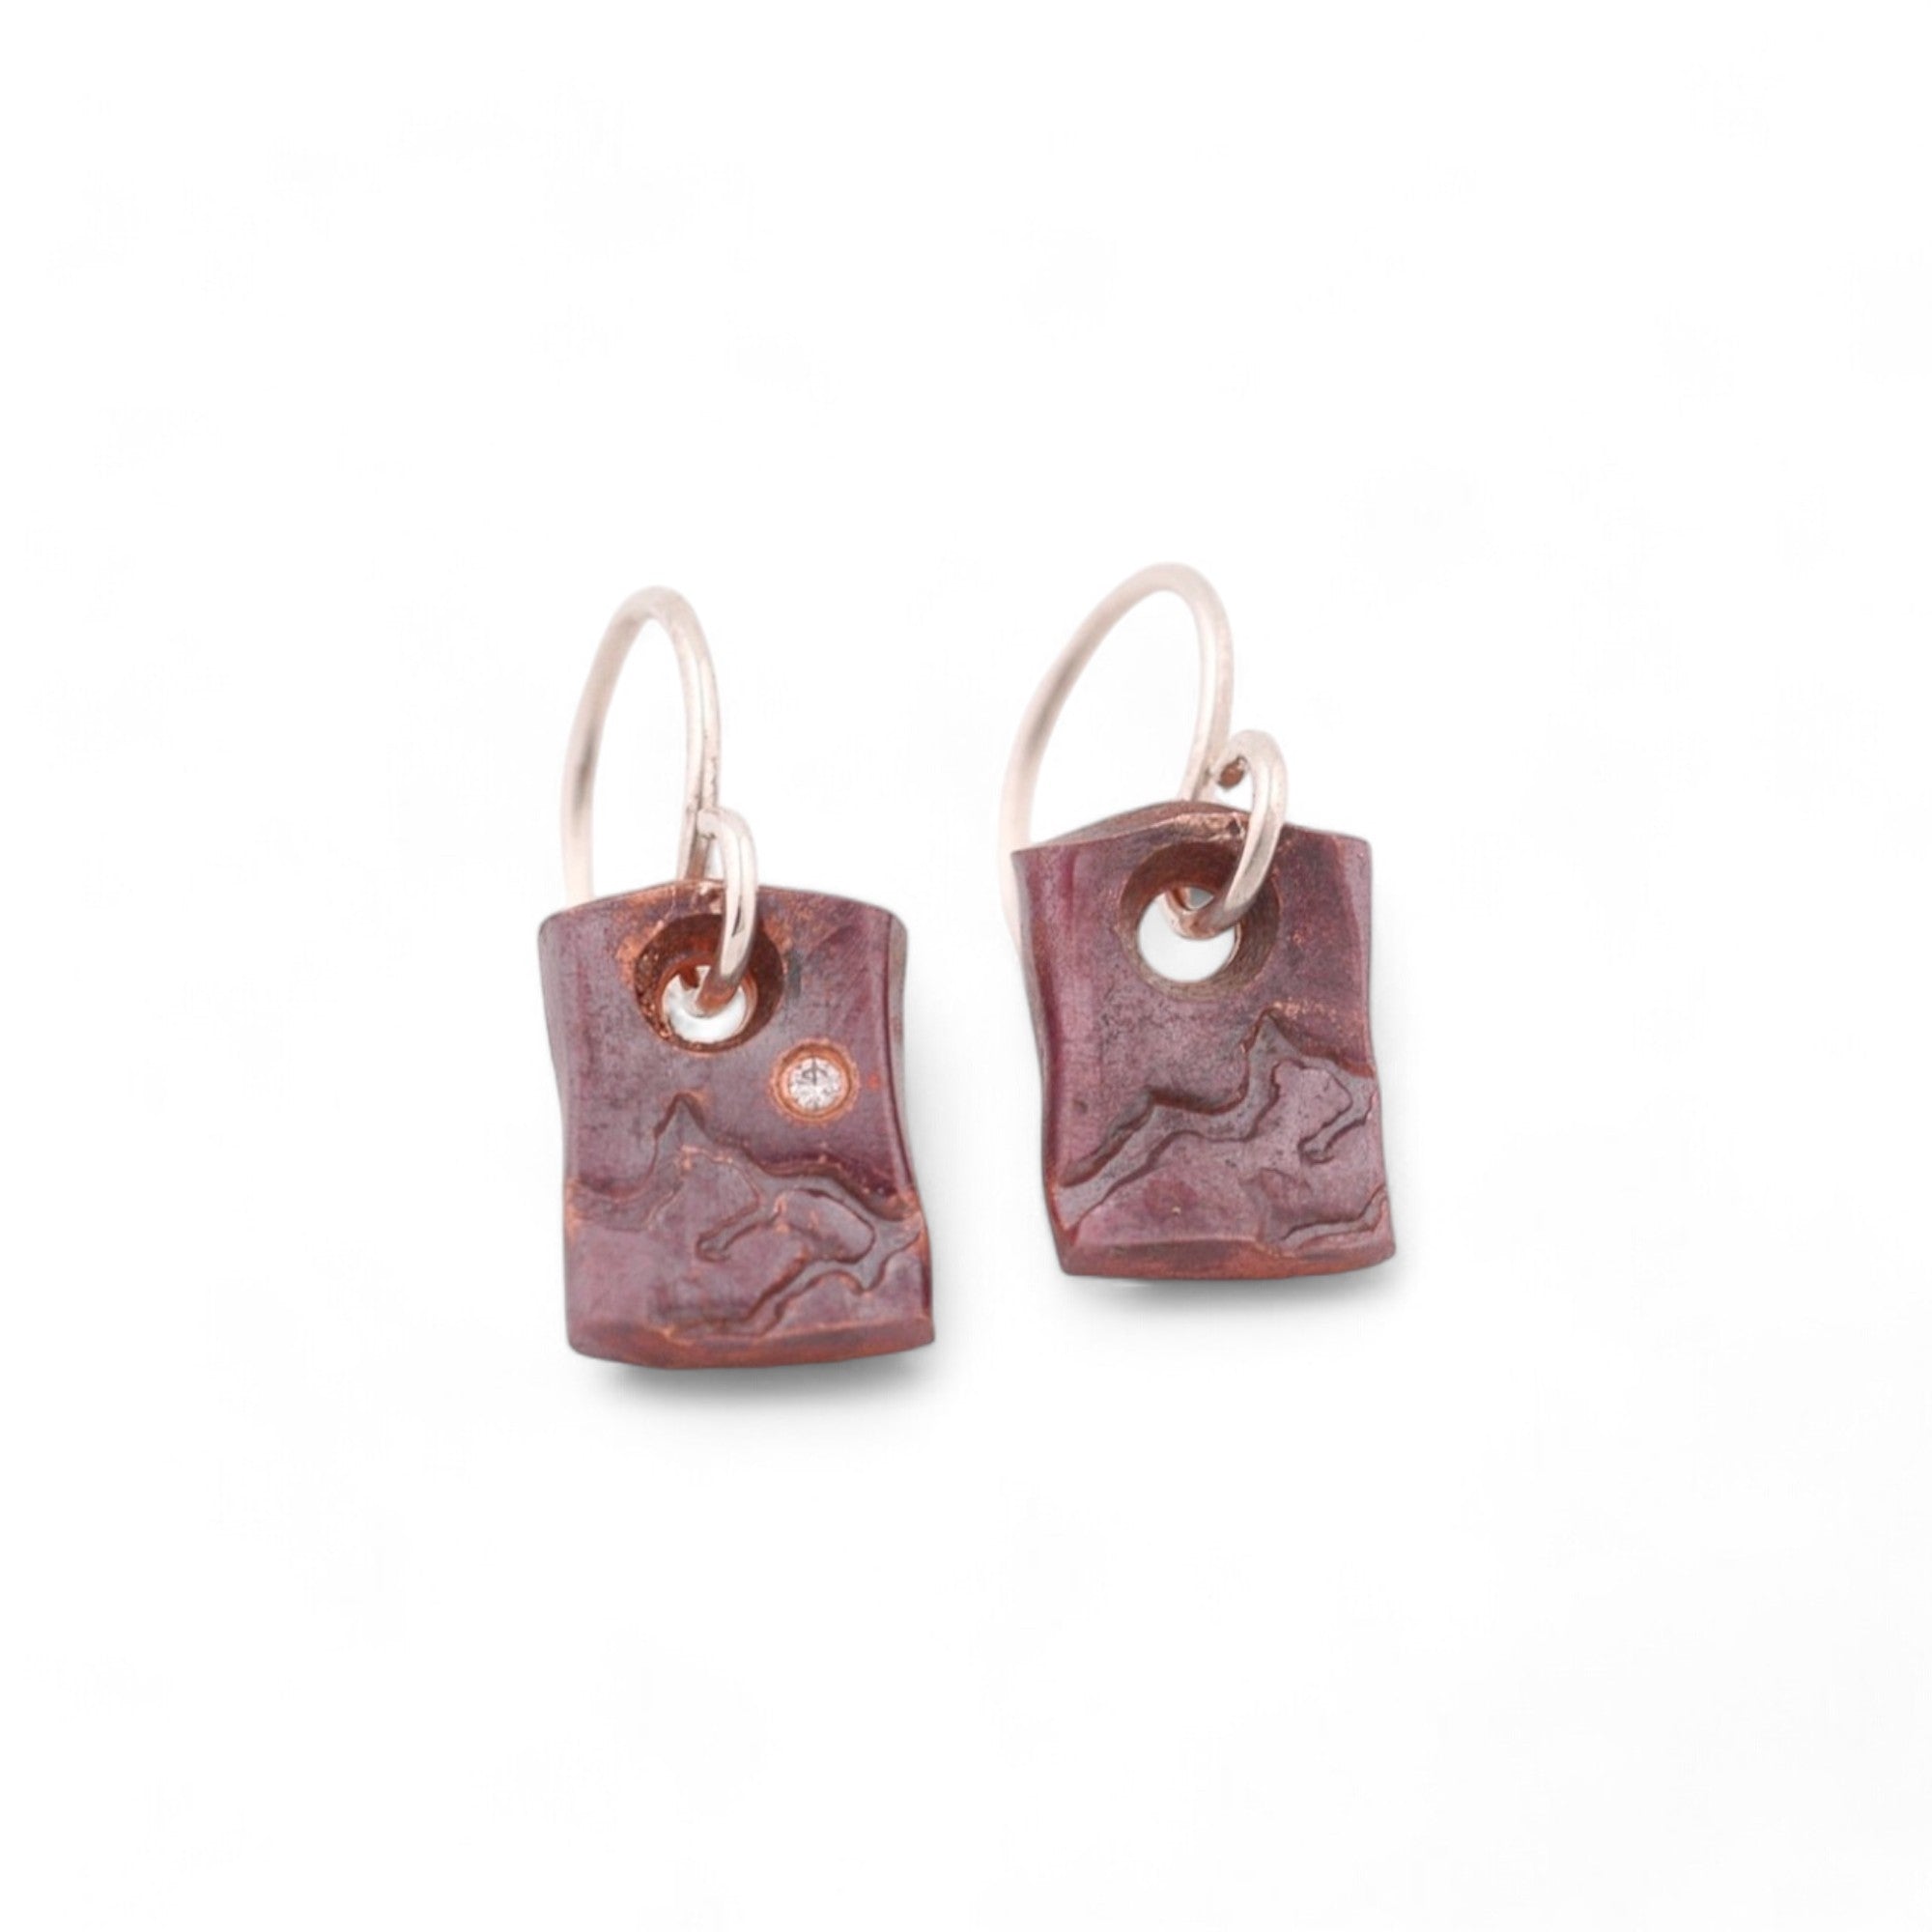 Vertical Copper Mountain Earrings with an Ideal Cut Diamond